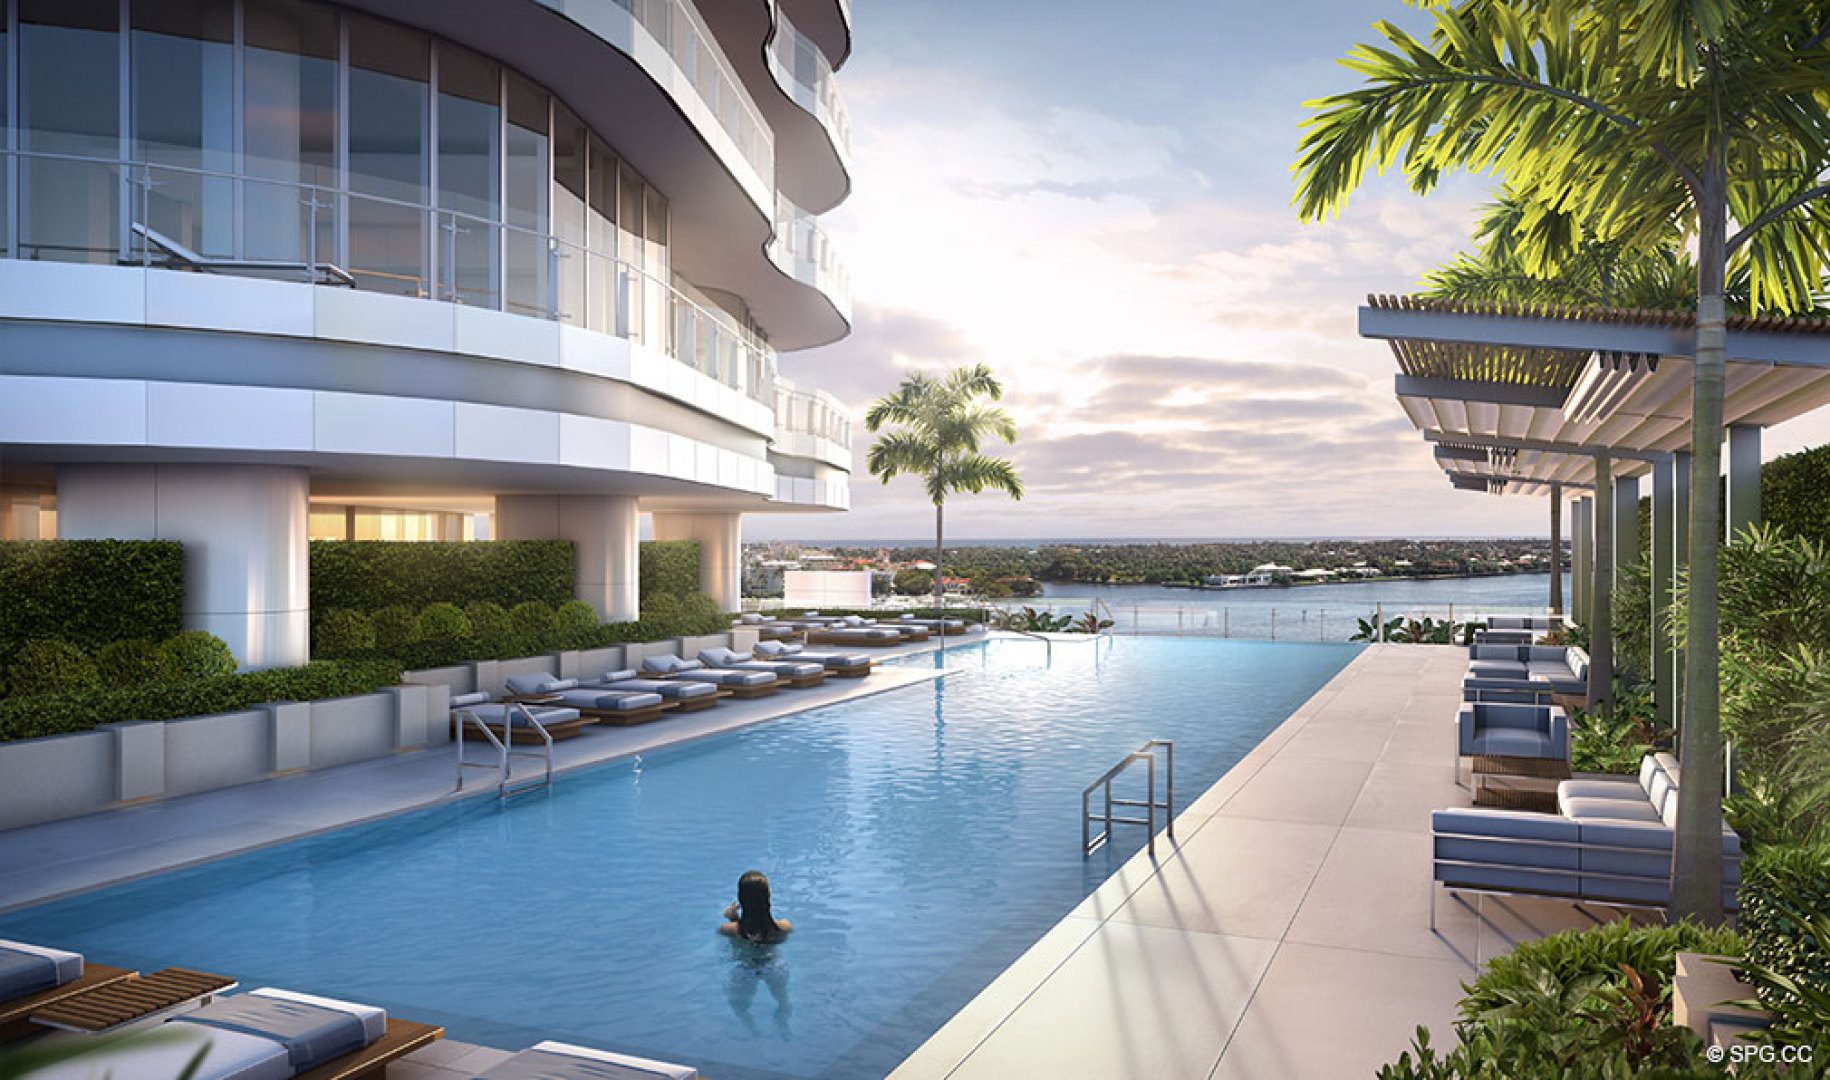 Pool Area at The Bristol, Luxury Waterfront Condos in West Palm Beach, Florida 33401